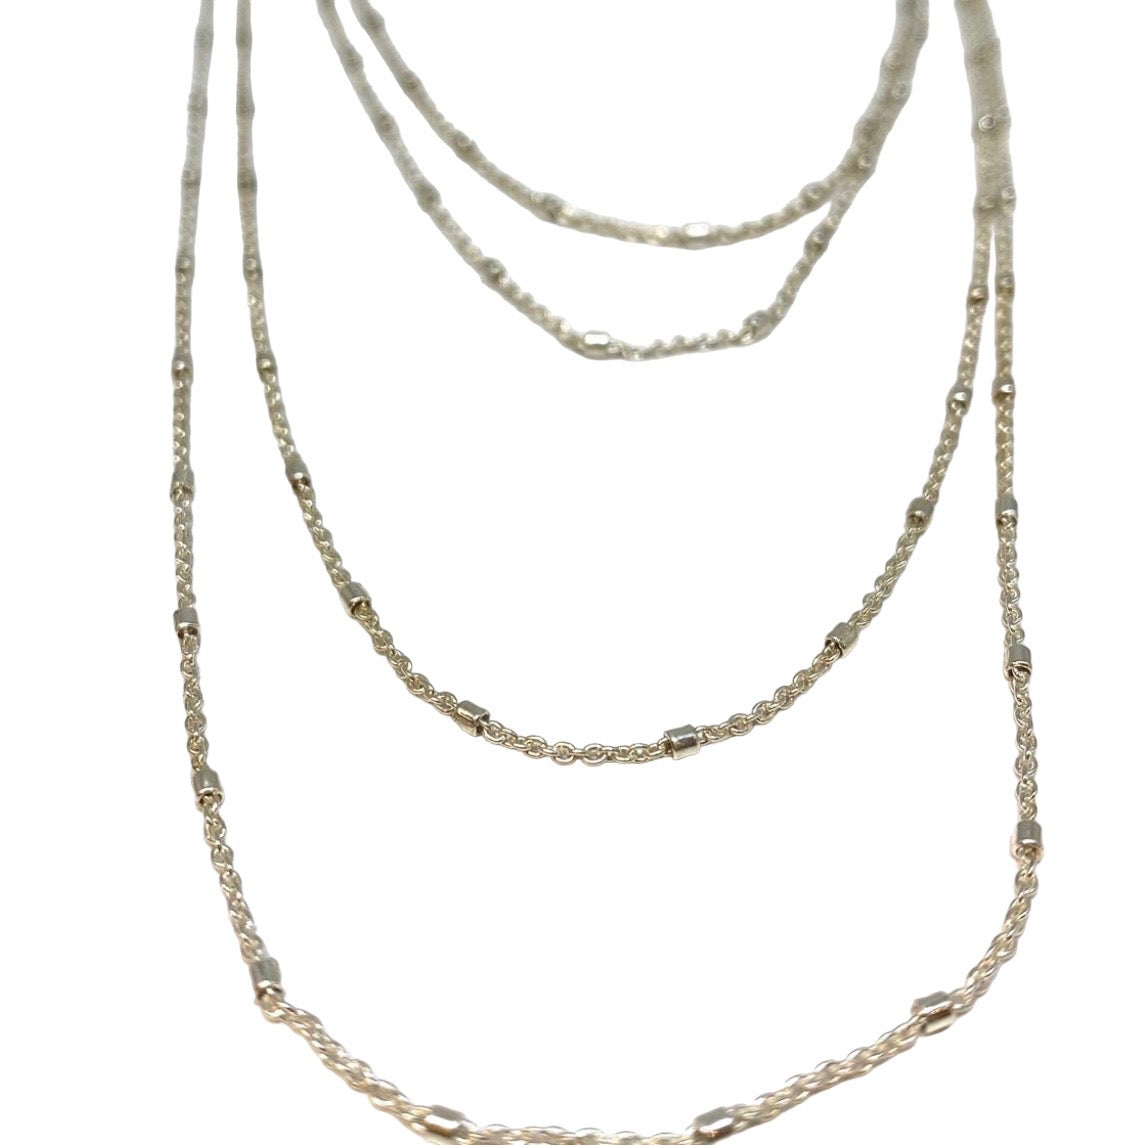 Thin stylish chain with silver studs